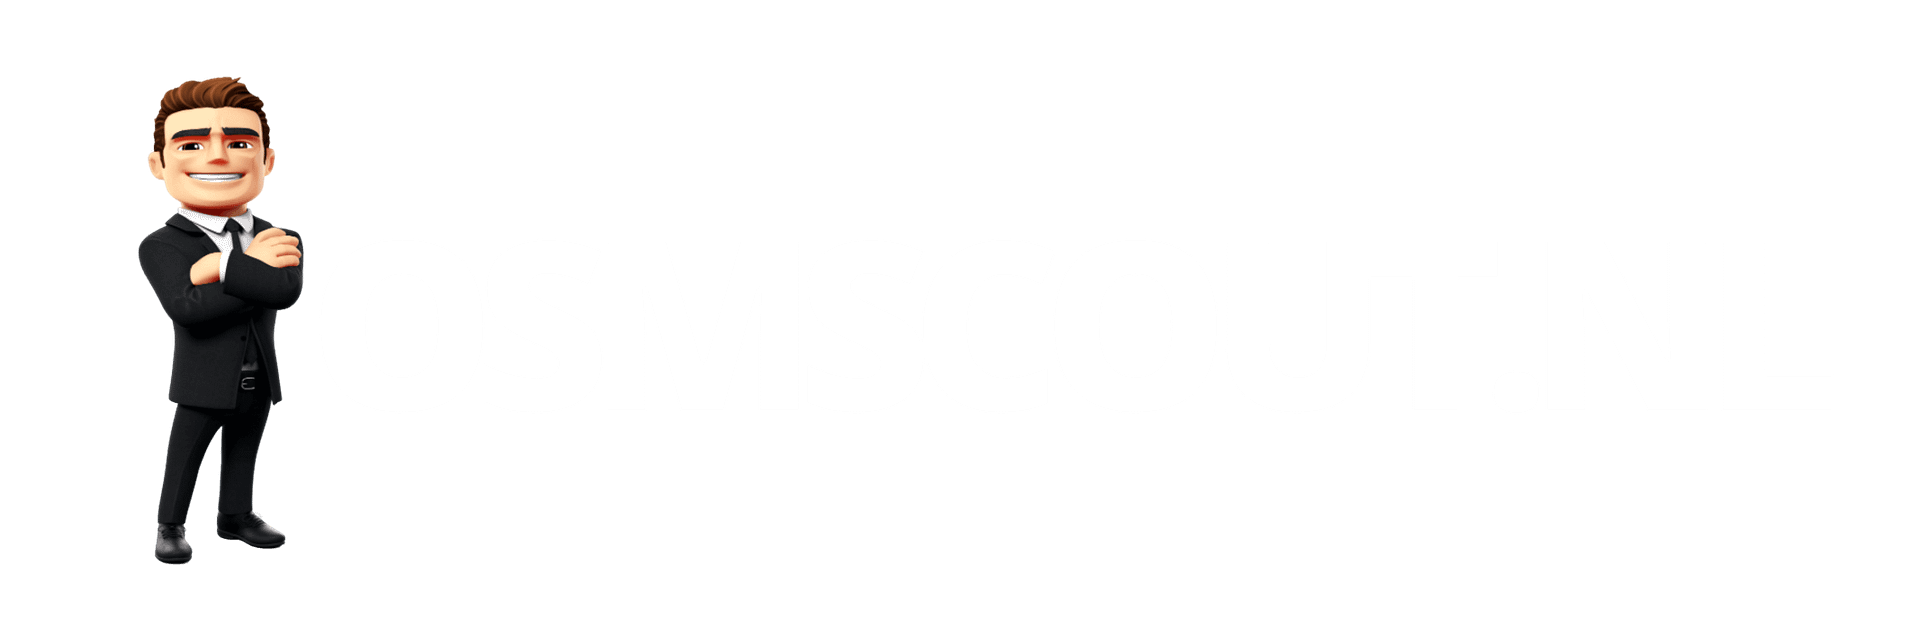 osmscout-logo